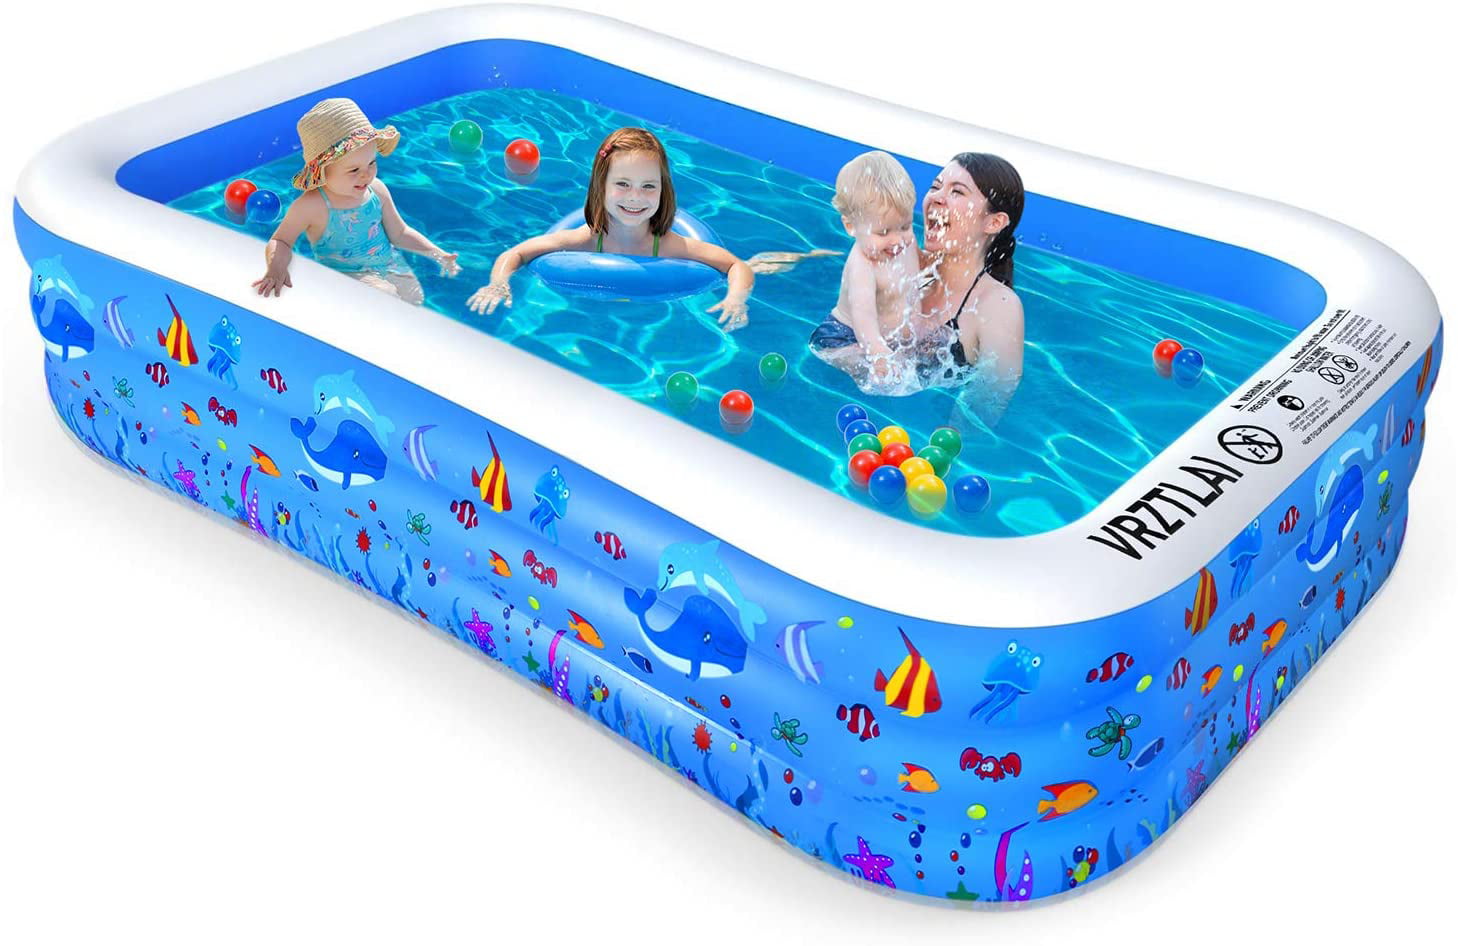 Pool Inflatable Kids Swimming Play Water Fun Large Children Outdoor High Quality 